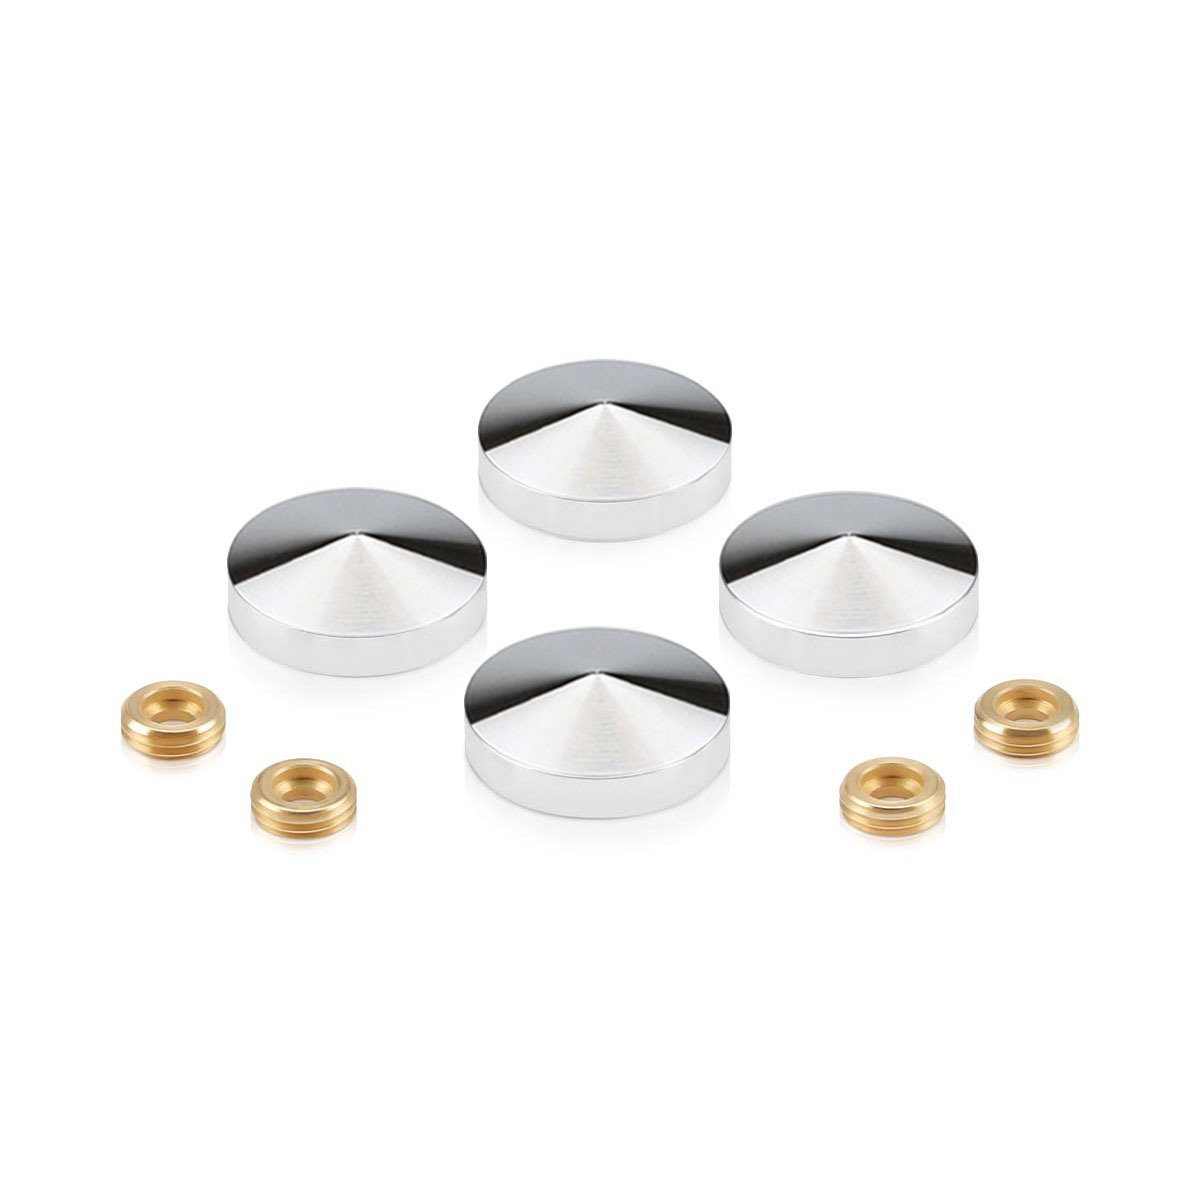 Set of Conical Screw Cover Diameter 1'', Satin Brushed Stainless Steel Finish (Indoor Use Only)